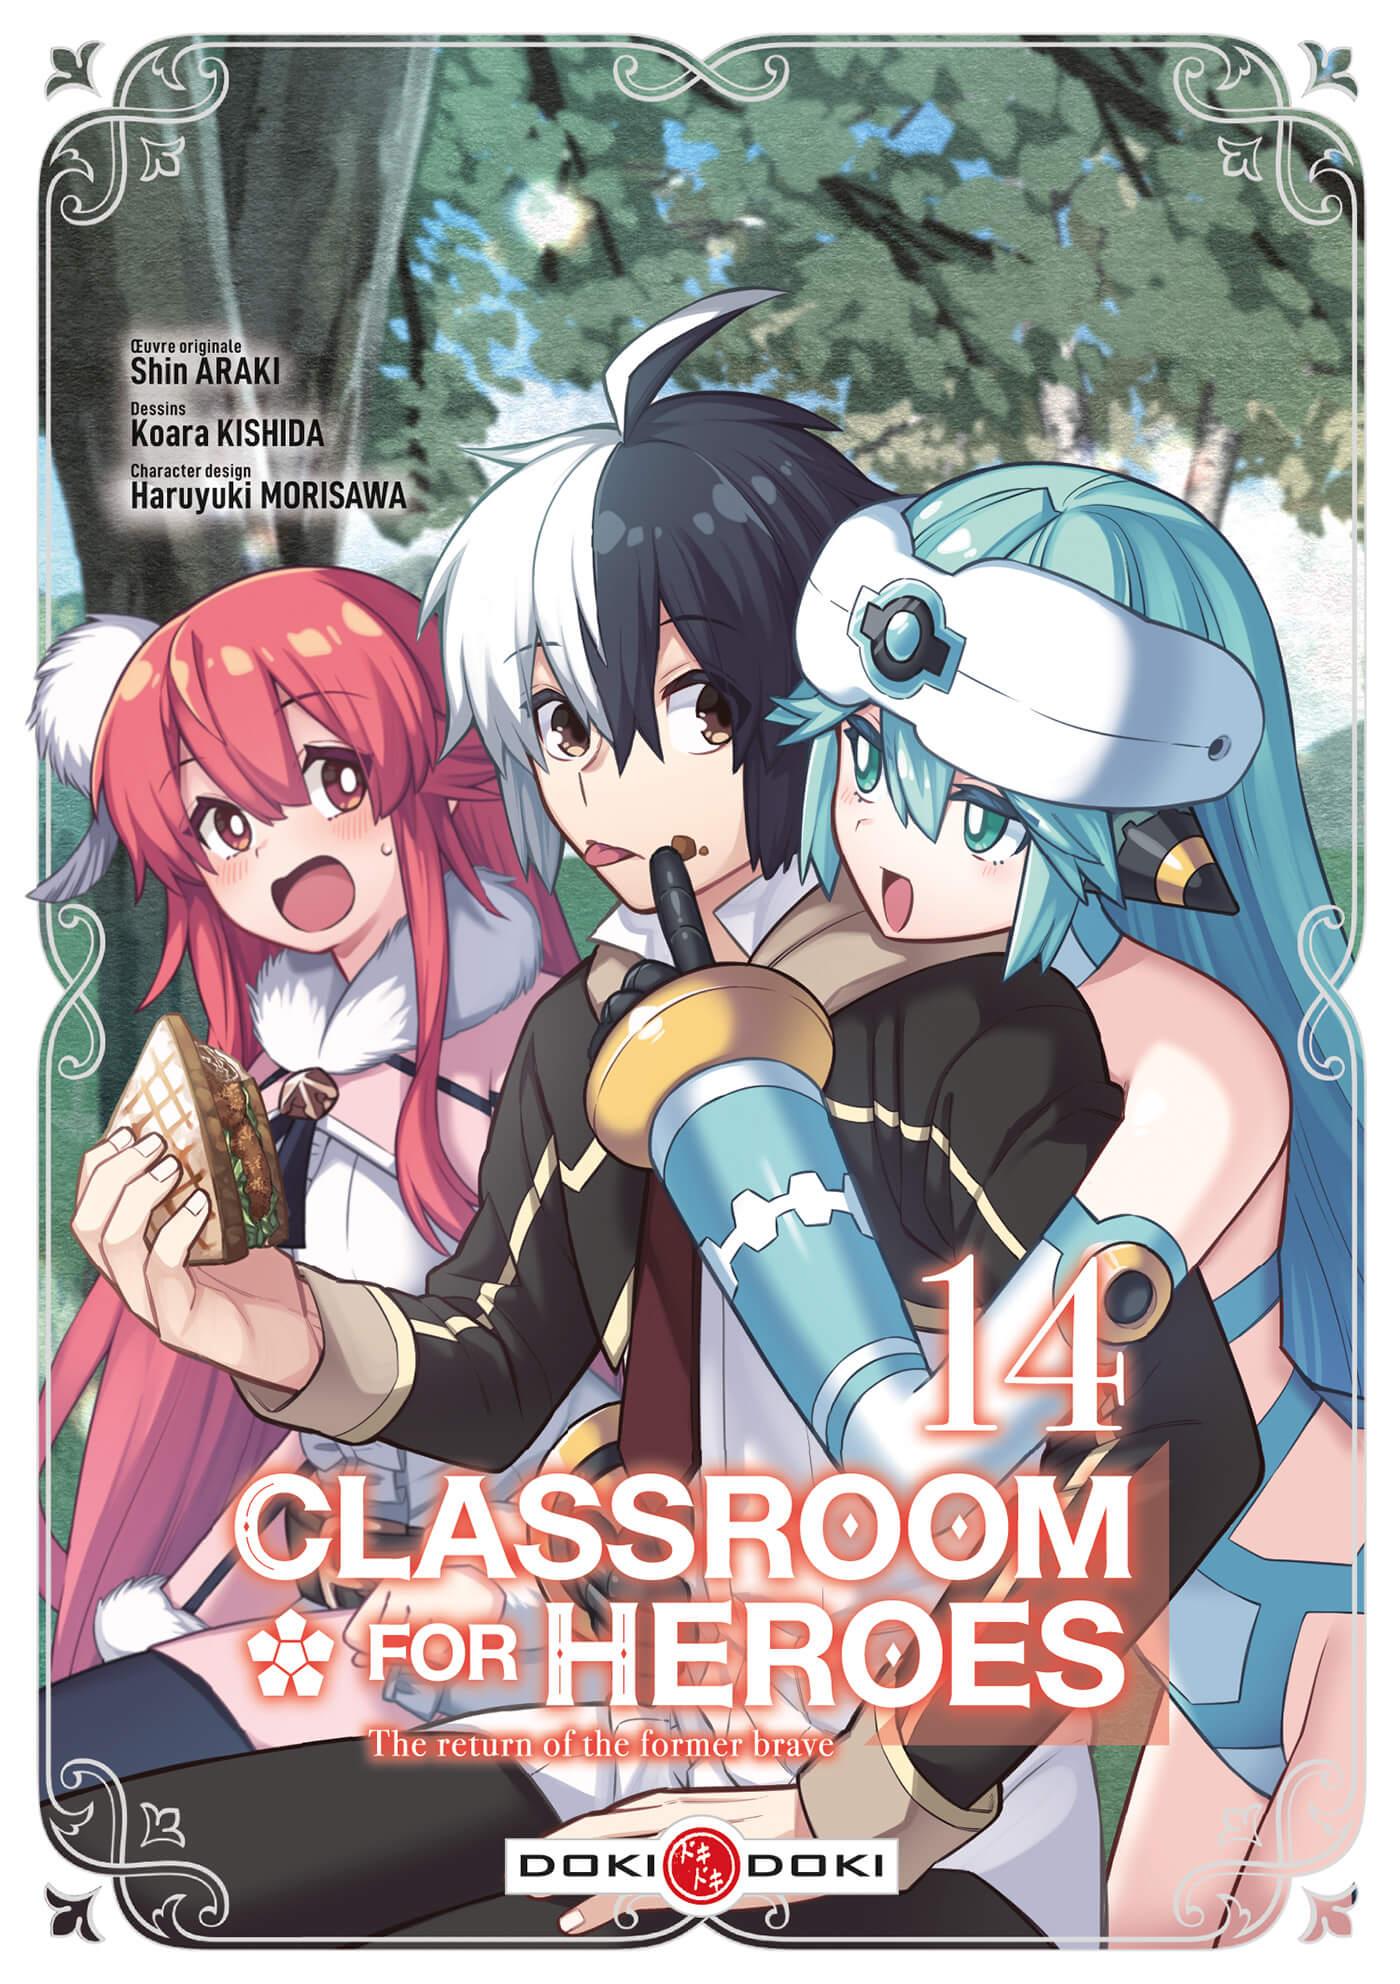 Couverture BD Classroom for Heroes